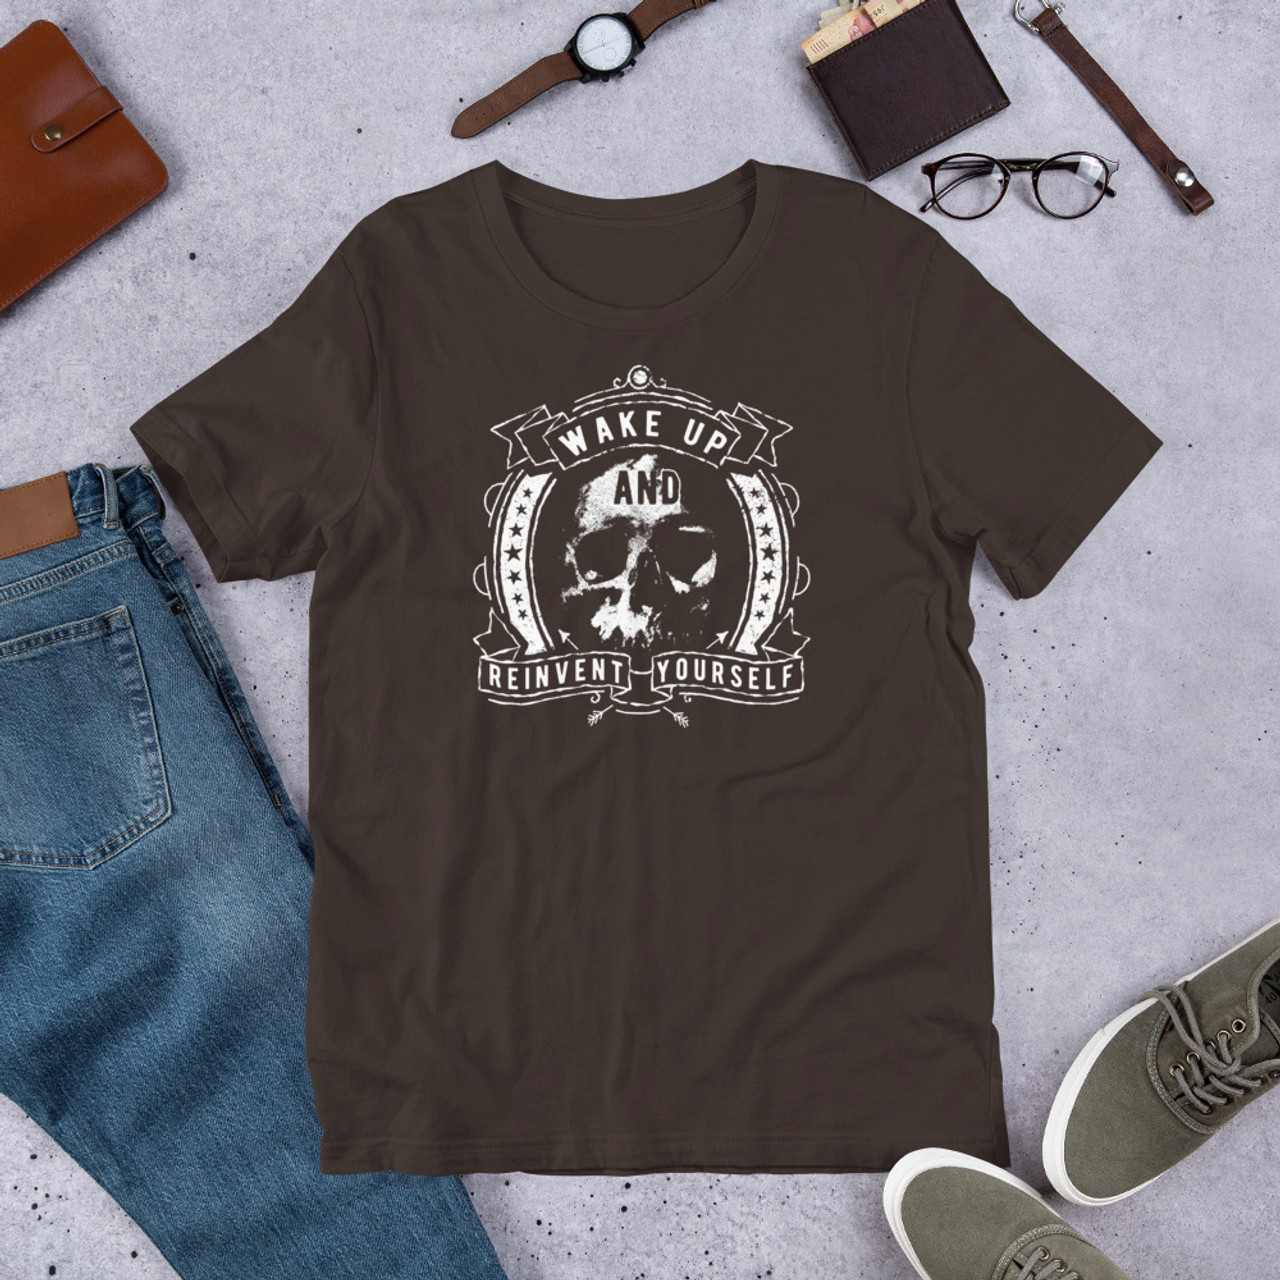 Brown T-Shirt - Bella + Canvas 3001 Wake Up and Reinvent Yourself